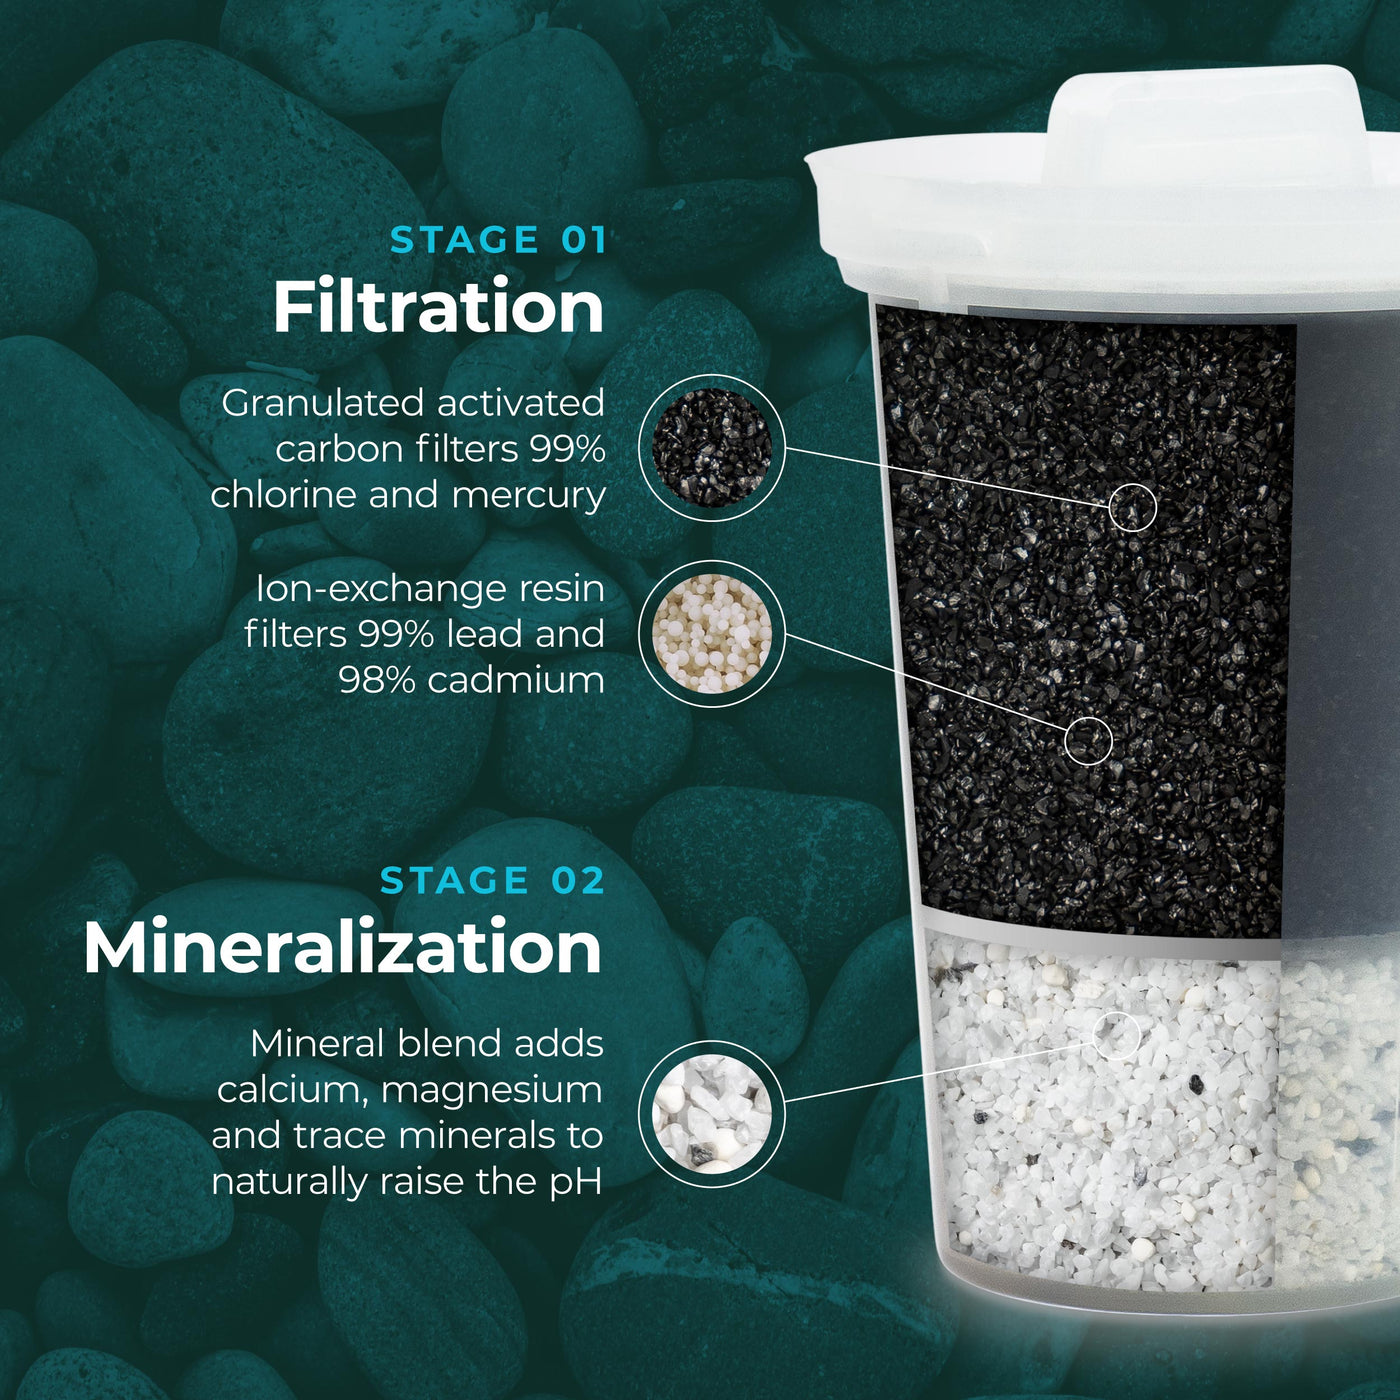 The Santevia MINA Alkaline Pitcher filter cutaway showing the granulated activated carbon and minerals within the filter#colour_black